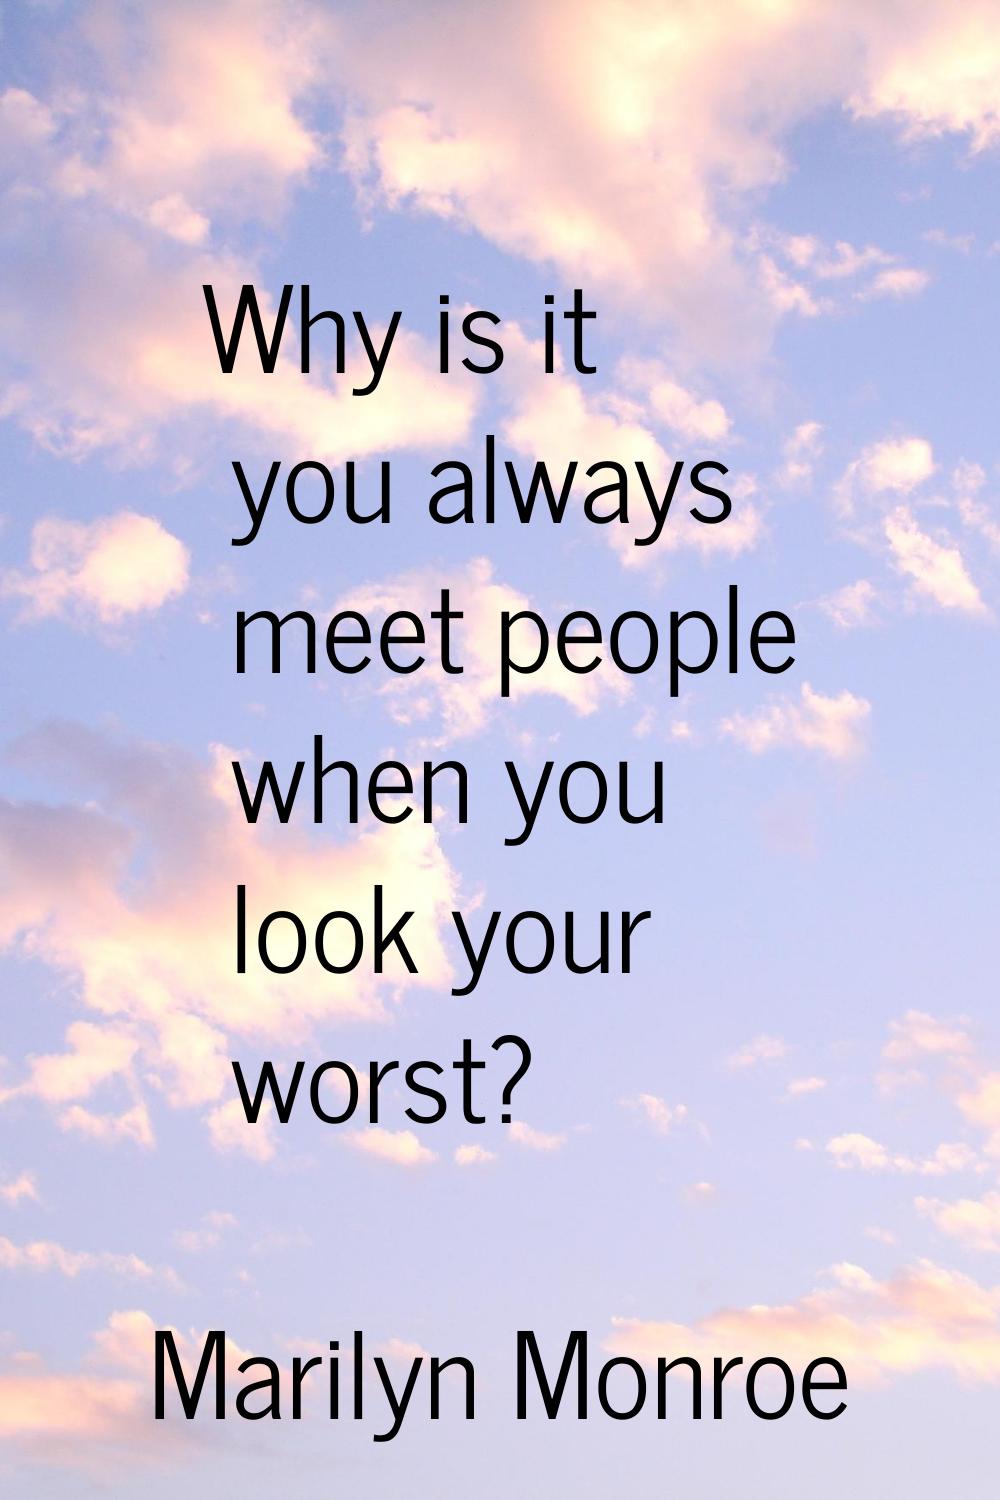 Why is it you always meet people when you look your worst?